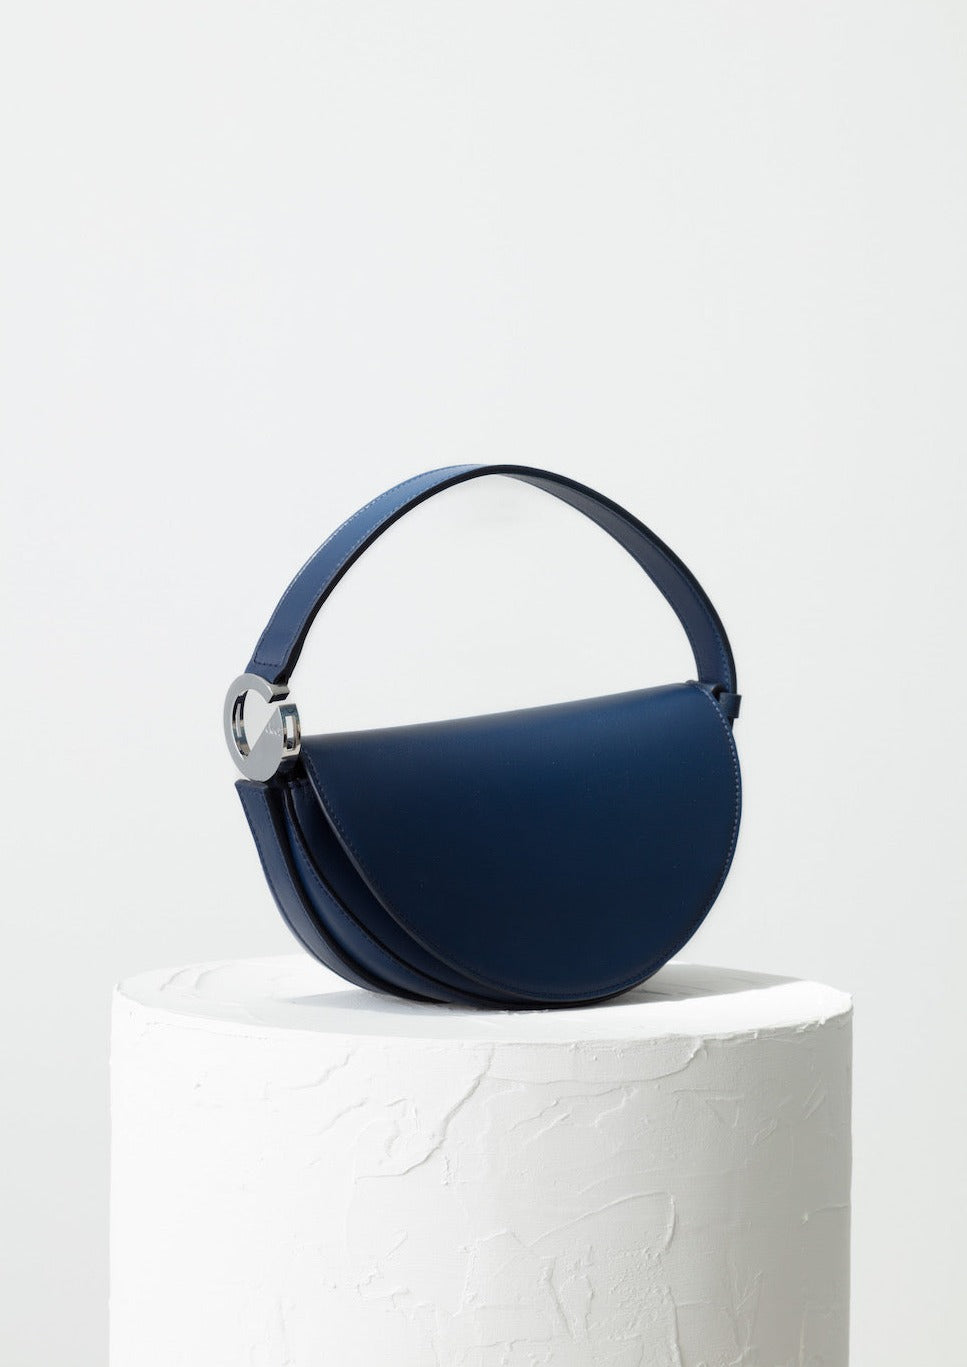 Dooz Scorpio navy leather half moon handbag with short strap and front magnetic flap